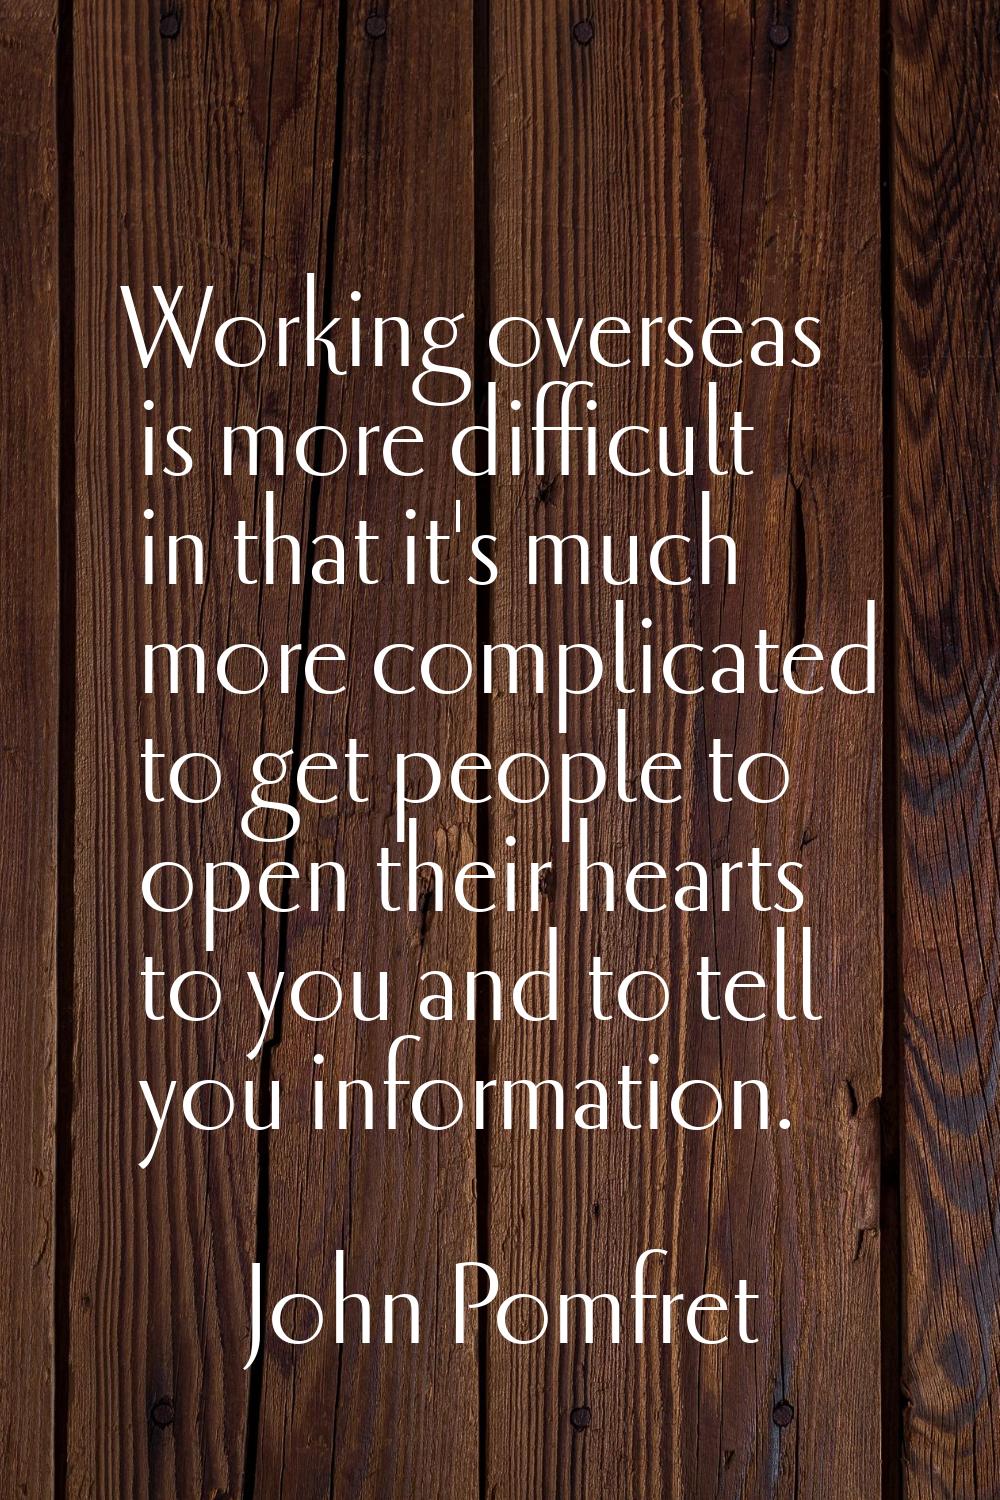 Working overseas is more difficult in that it's much more complicated to get people to open their h